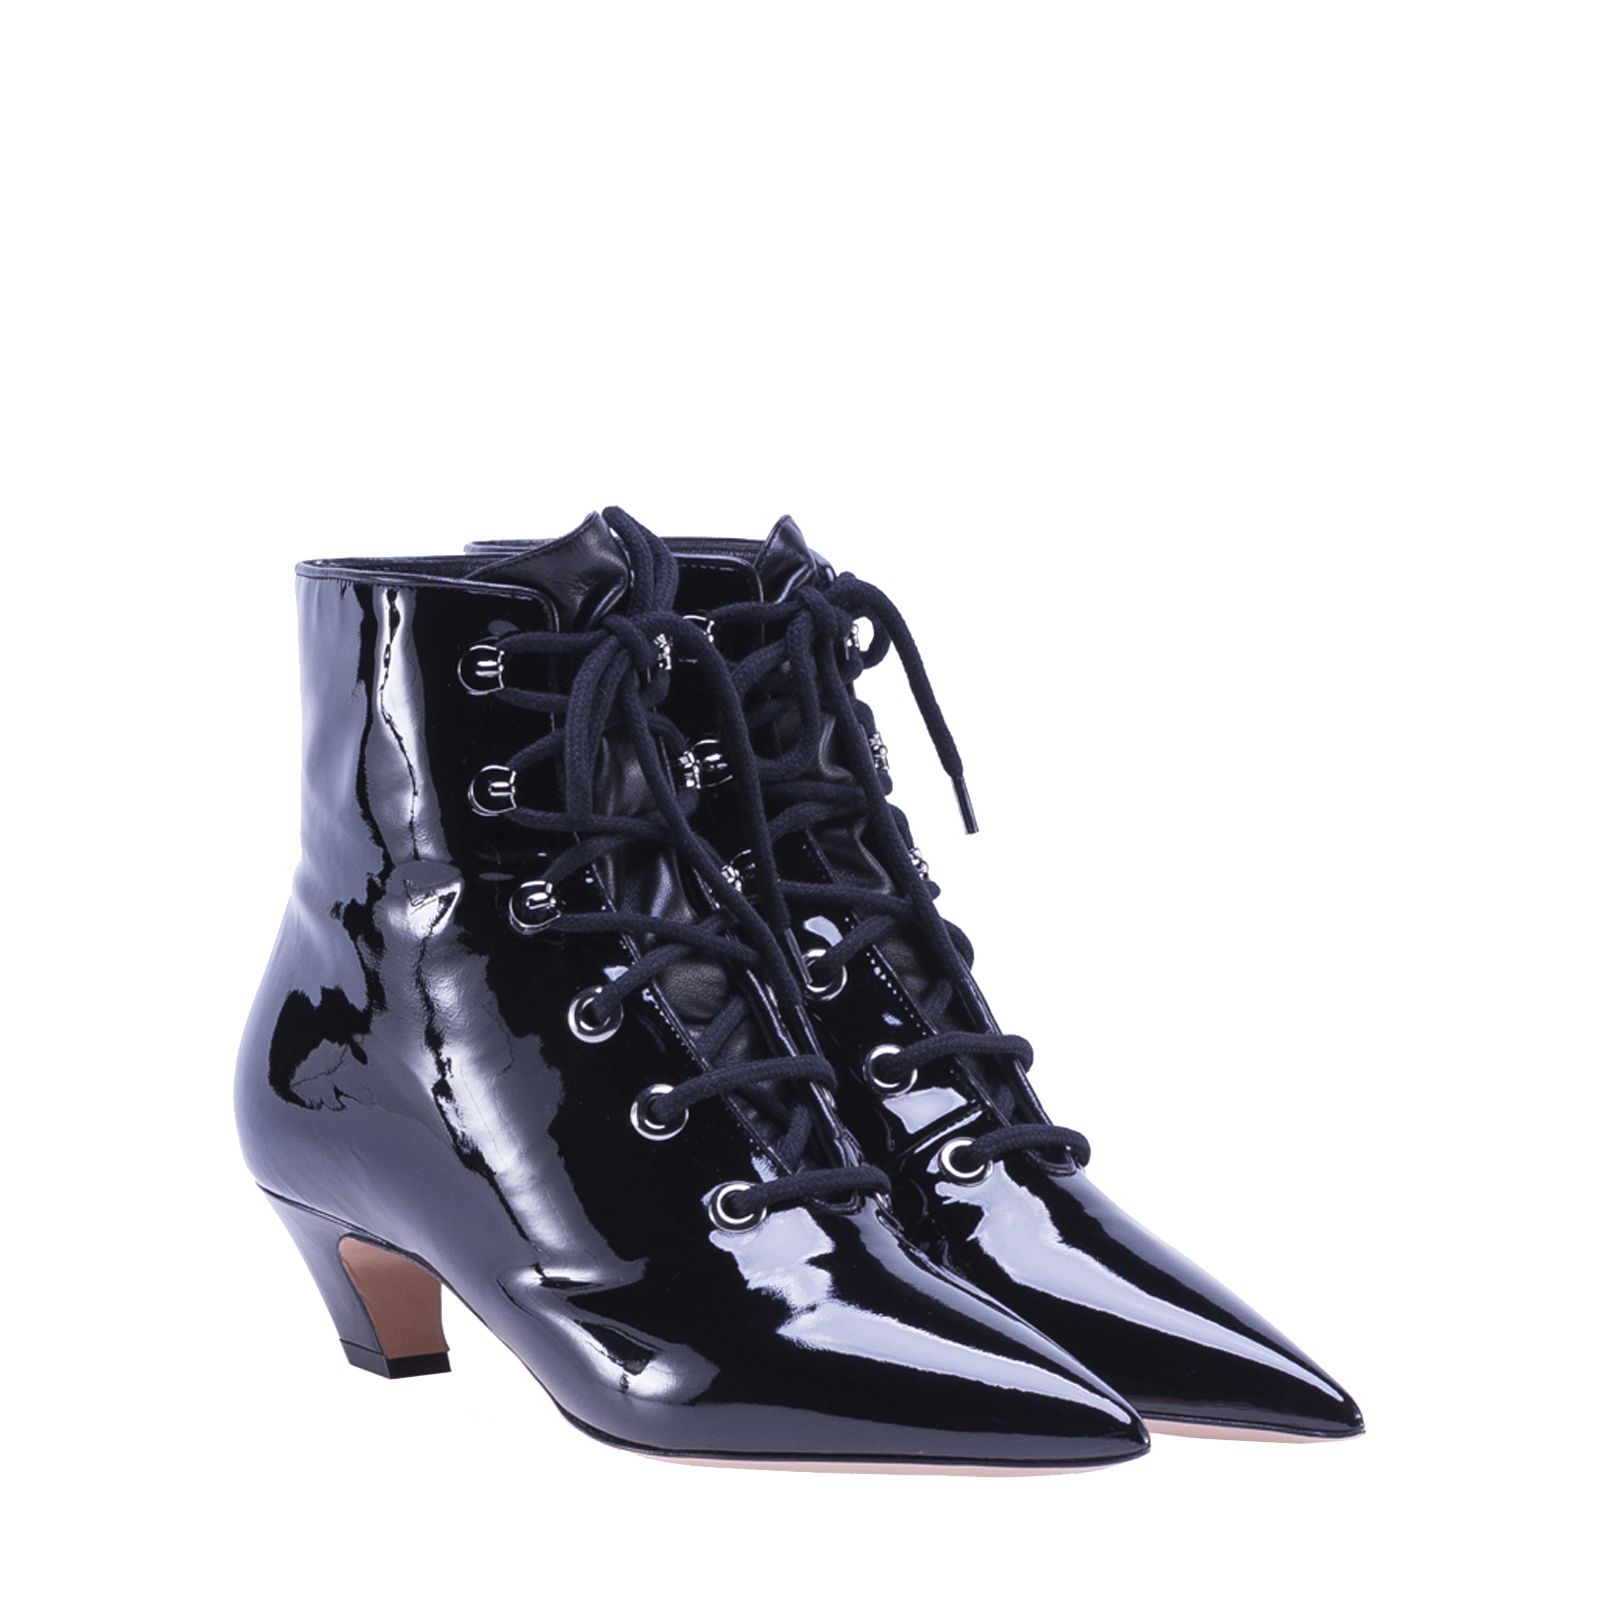 Dior - Christian Dior Lace Up Boots - BLACK, Women's Boots | Italist